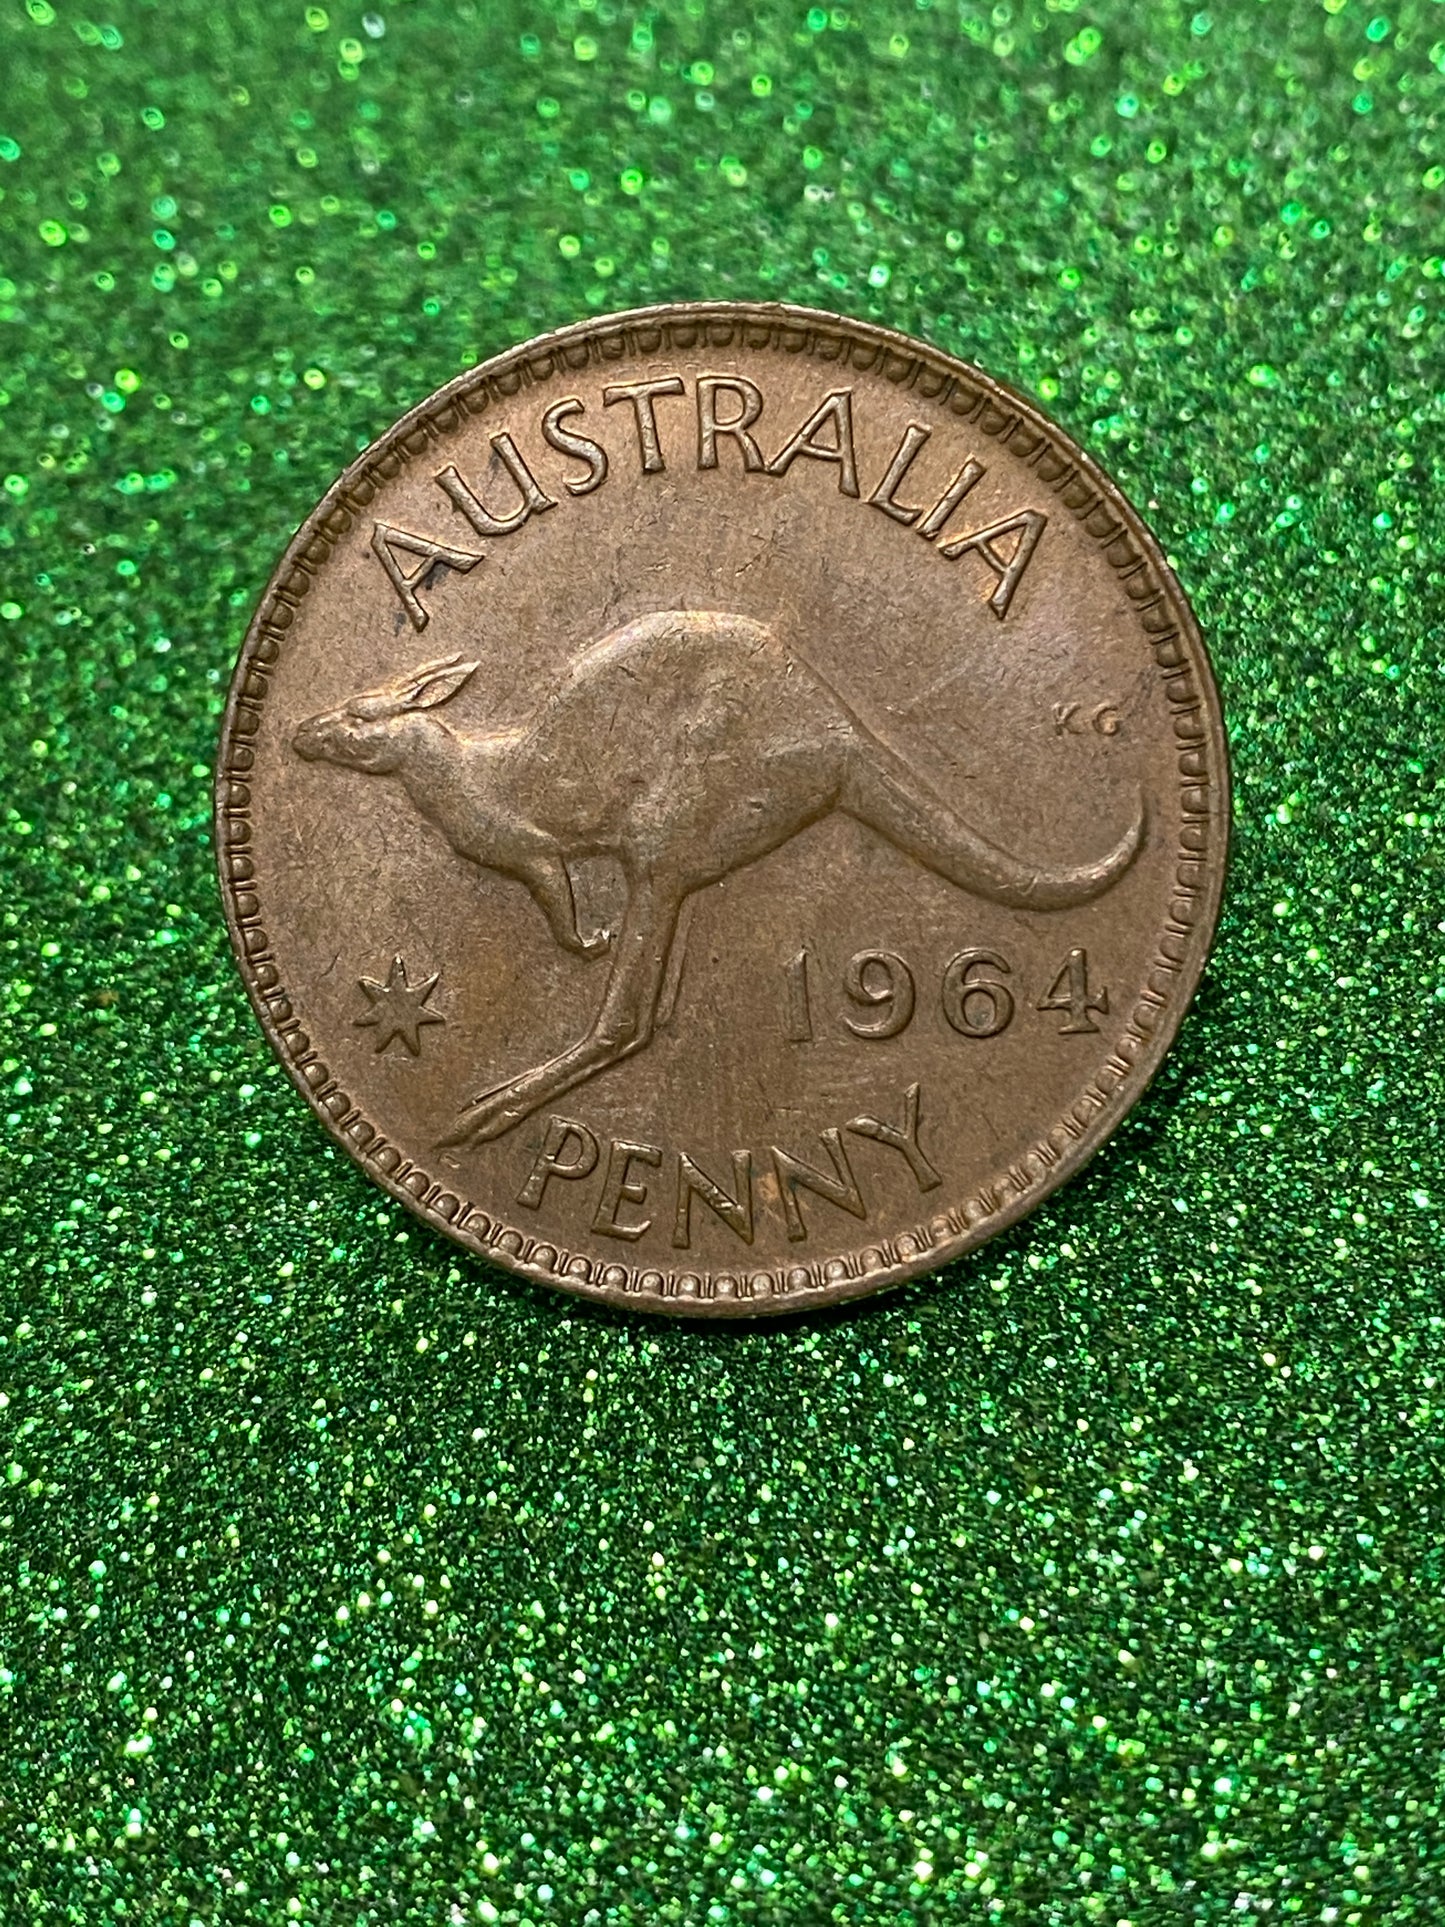 Australian 1 Cent LARGE PENNY COIN 1964 Queen Elizabeth F/VF CONDITION